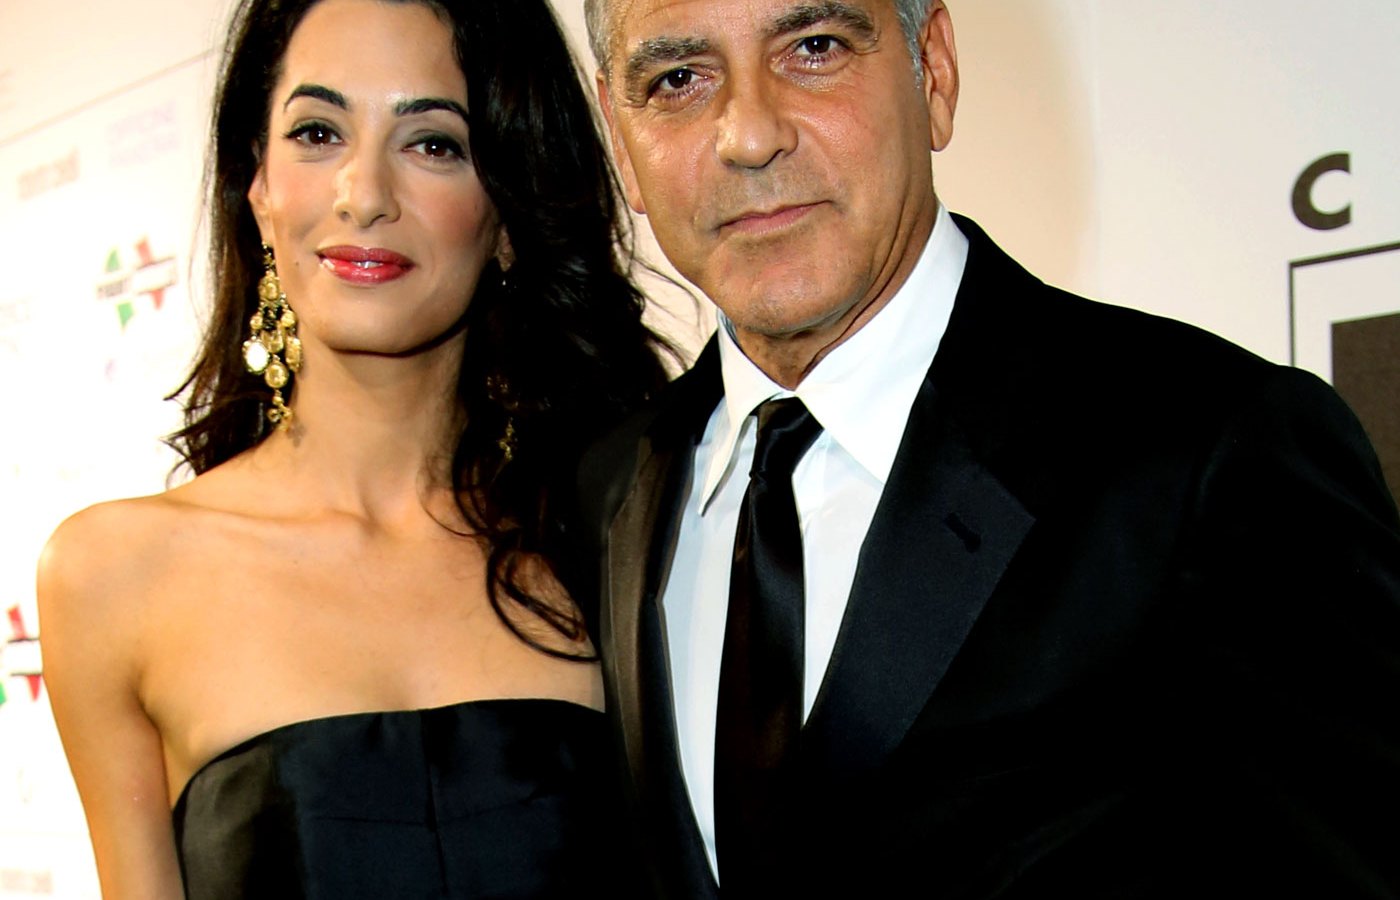 George Clooney and Amal Alamuddin will marry in Venice